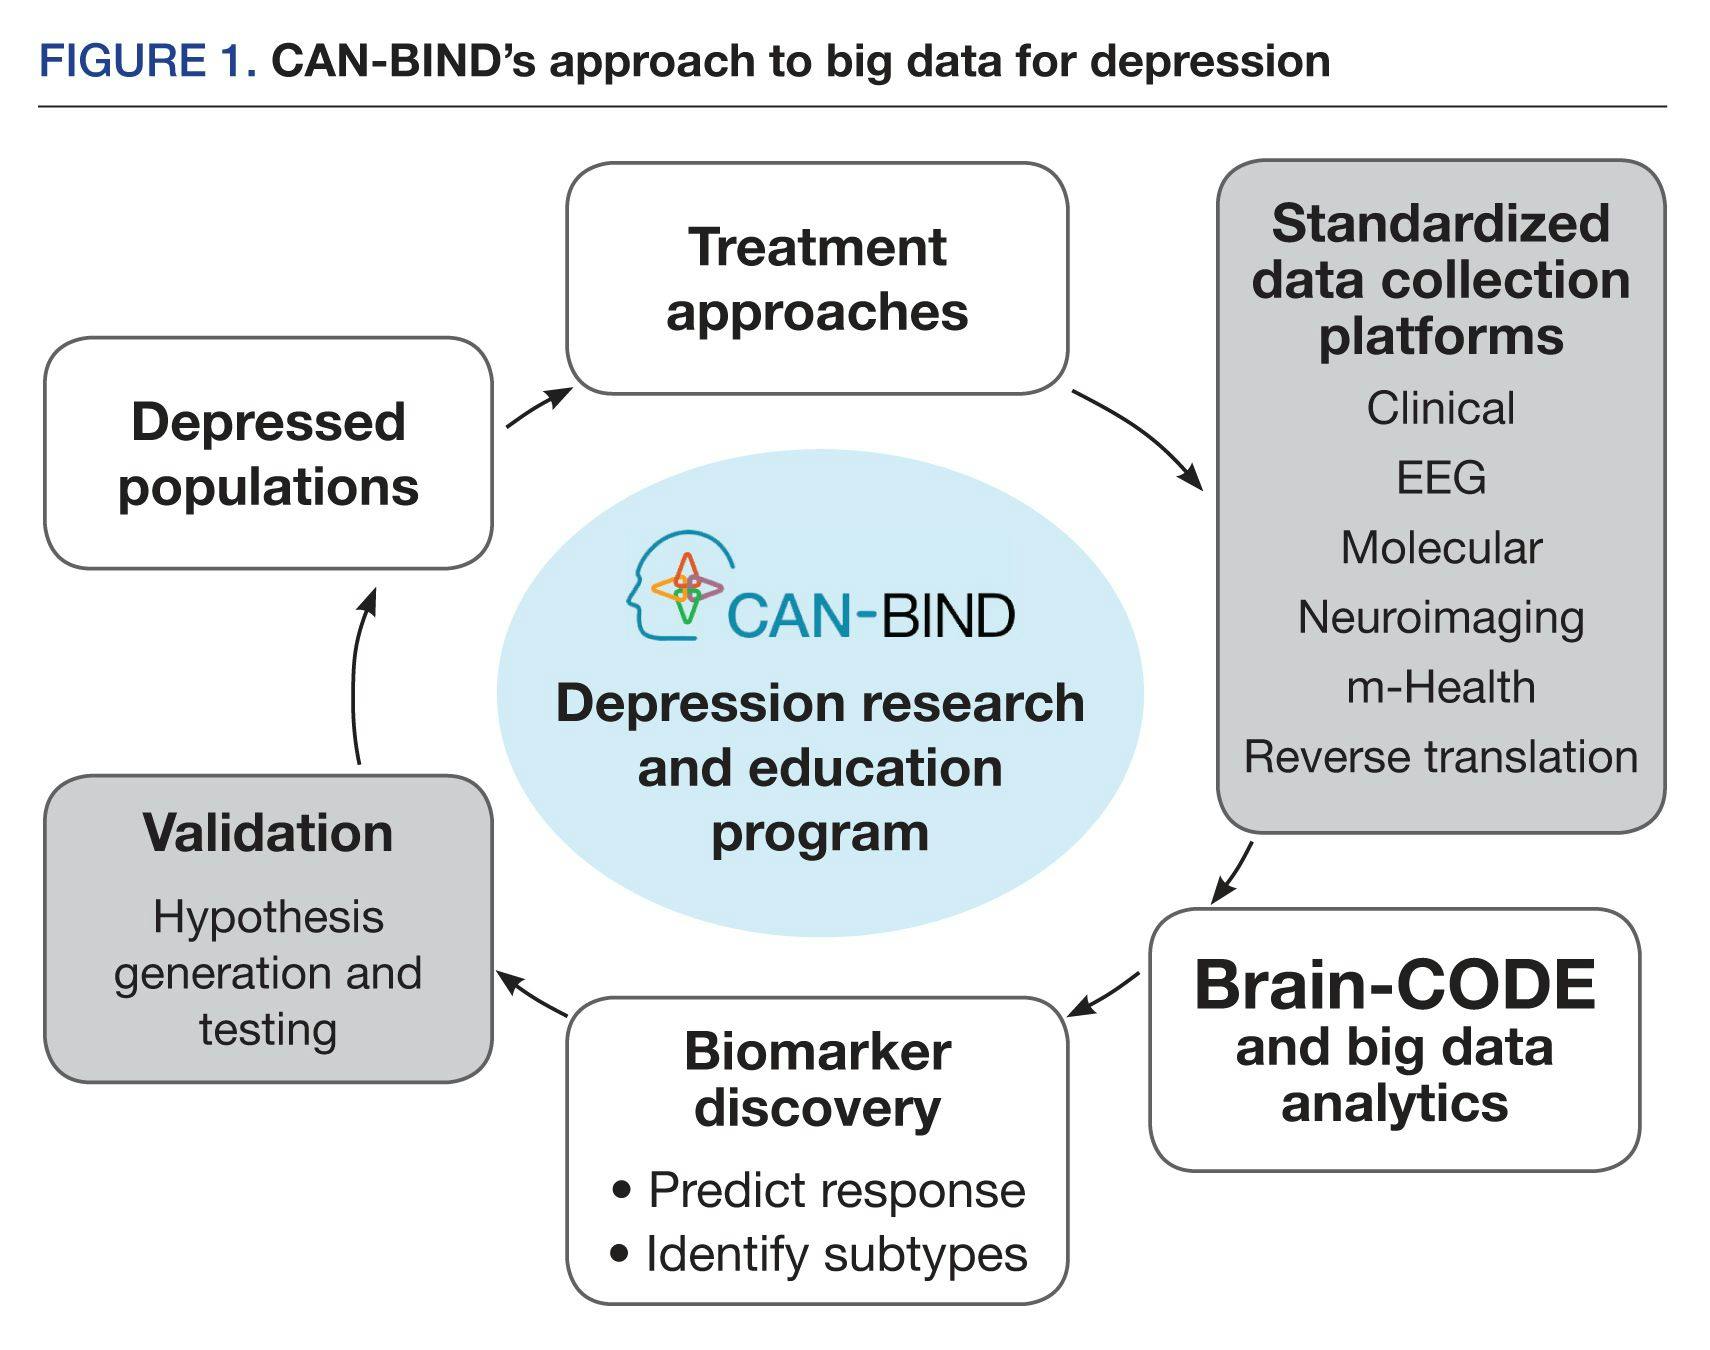 CAN-BIND’s approach to big data for depression